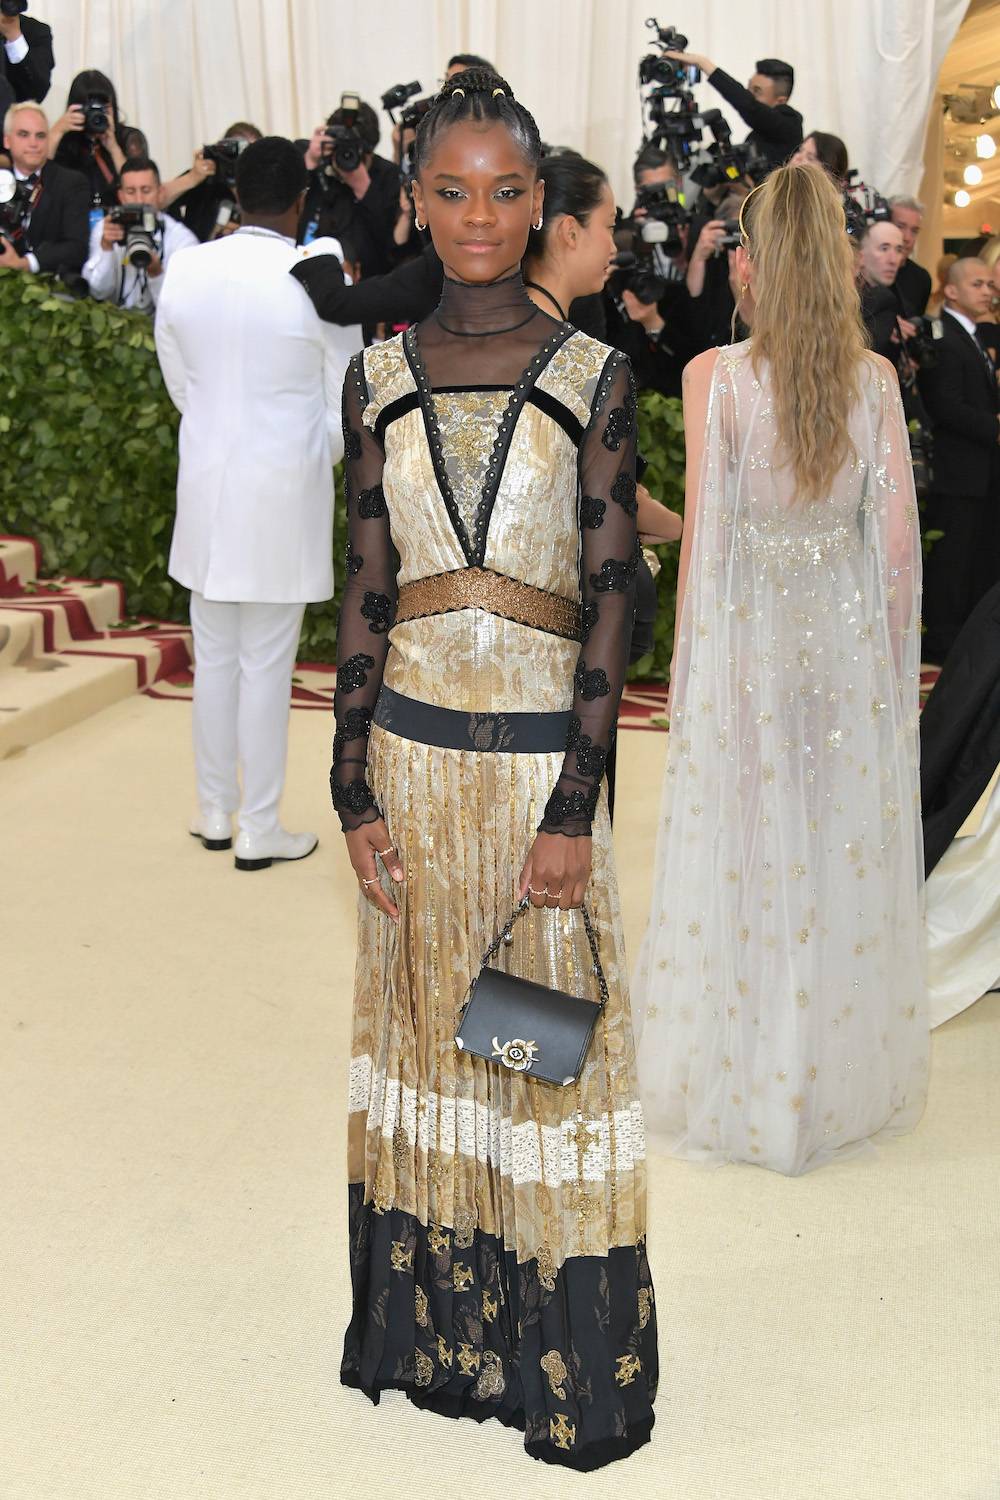 Letitia Wright (Fot. Getty Images)